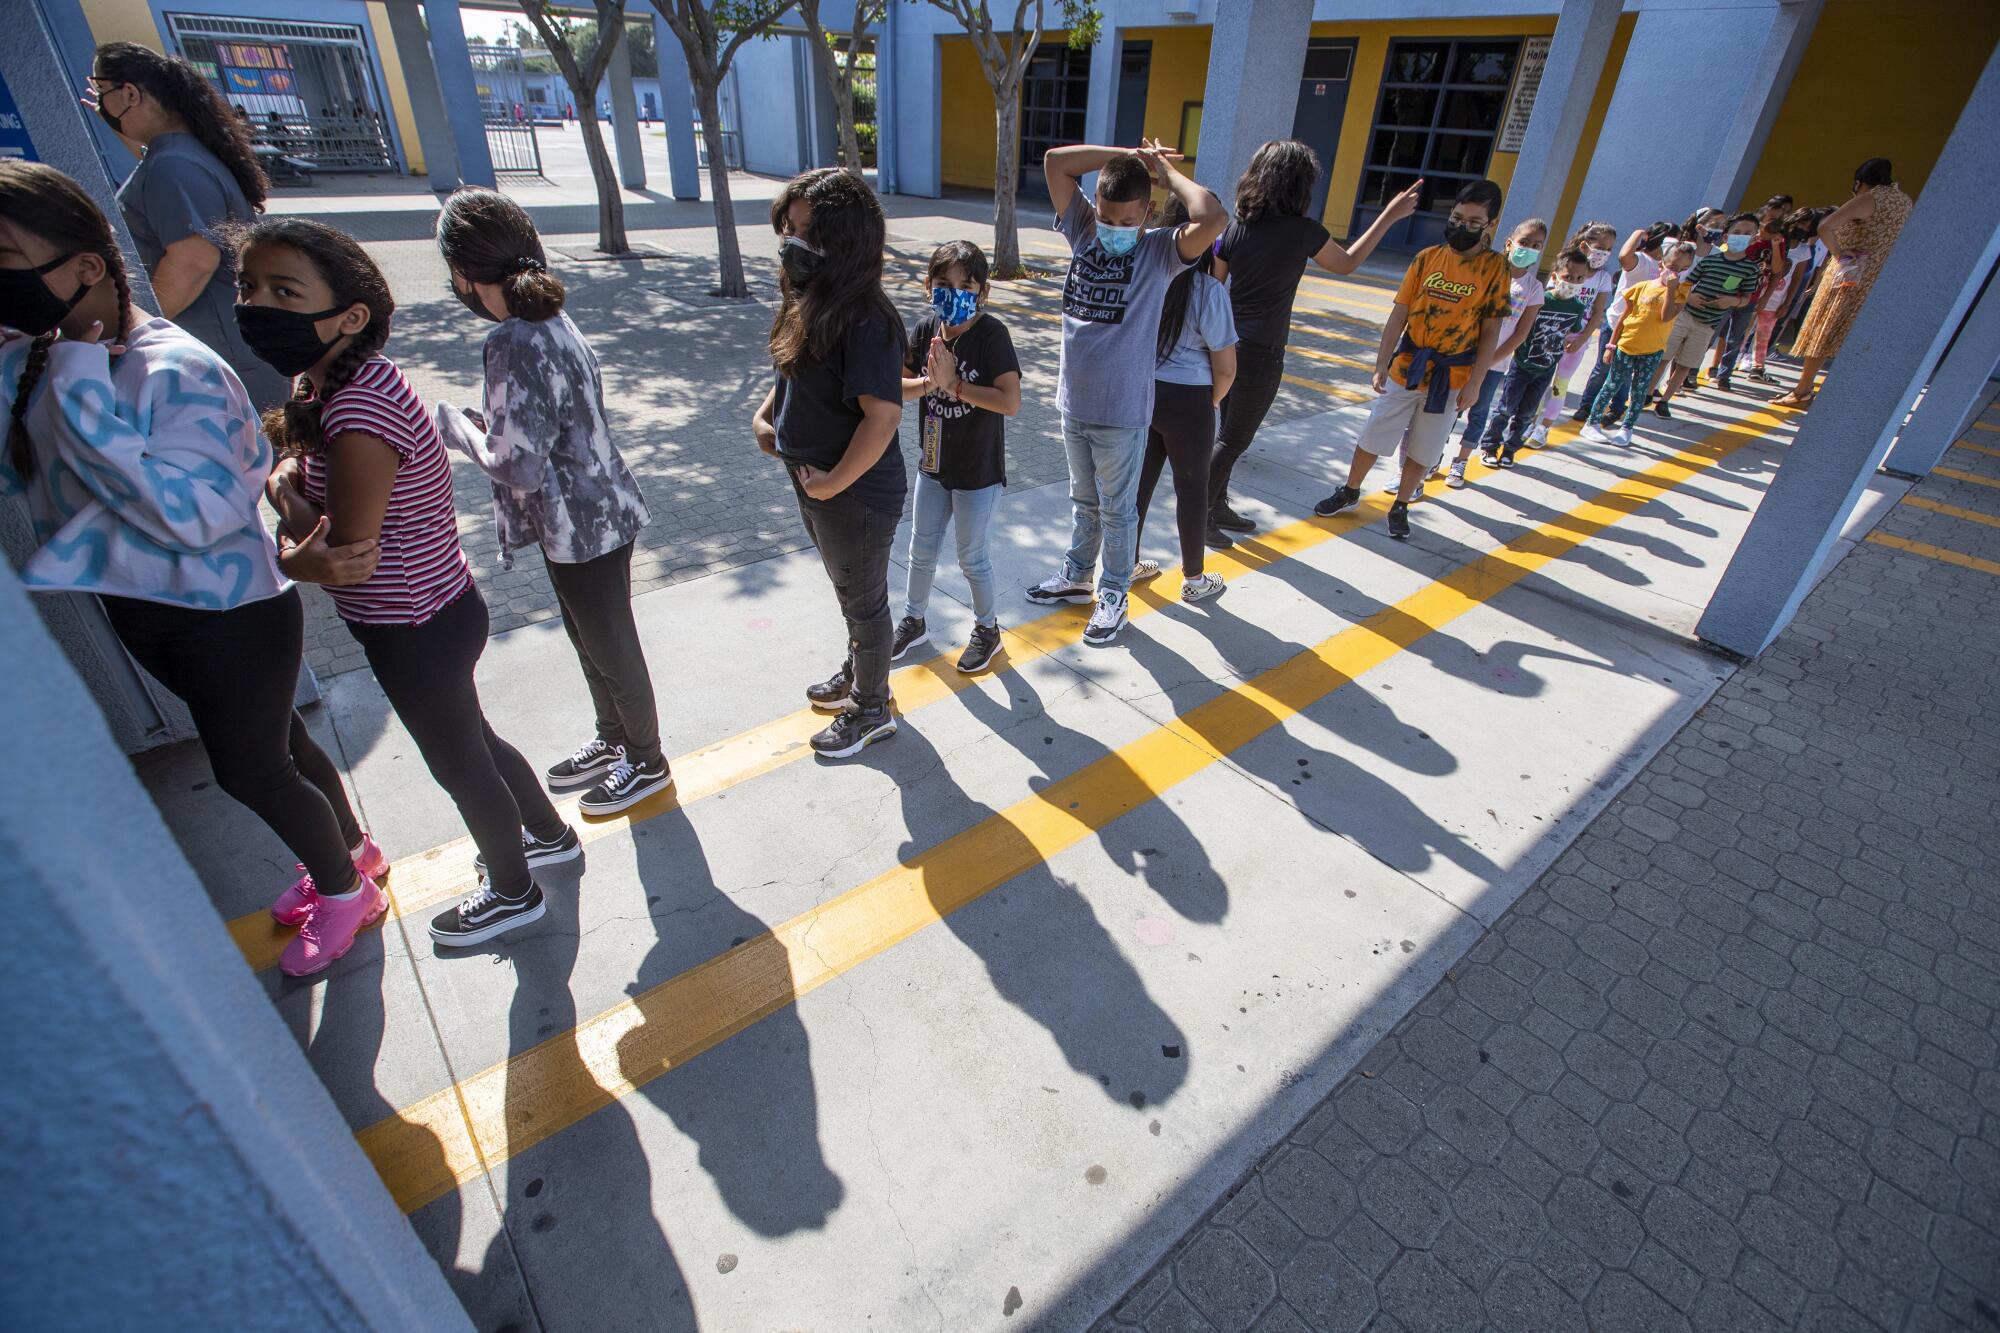 Second graders wait in line for a snack on the first day of school at Montara Avenue Elementary School in South Gate.